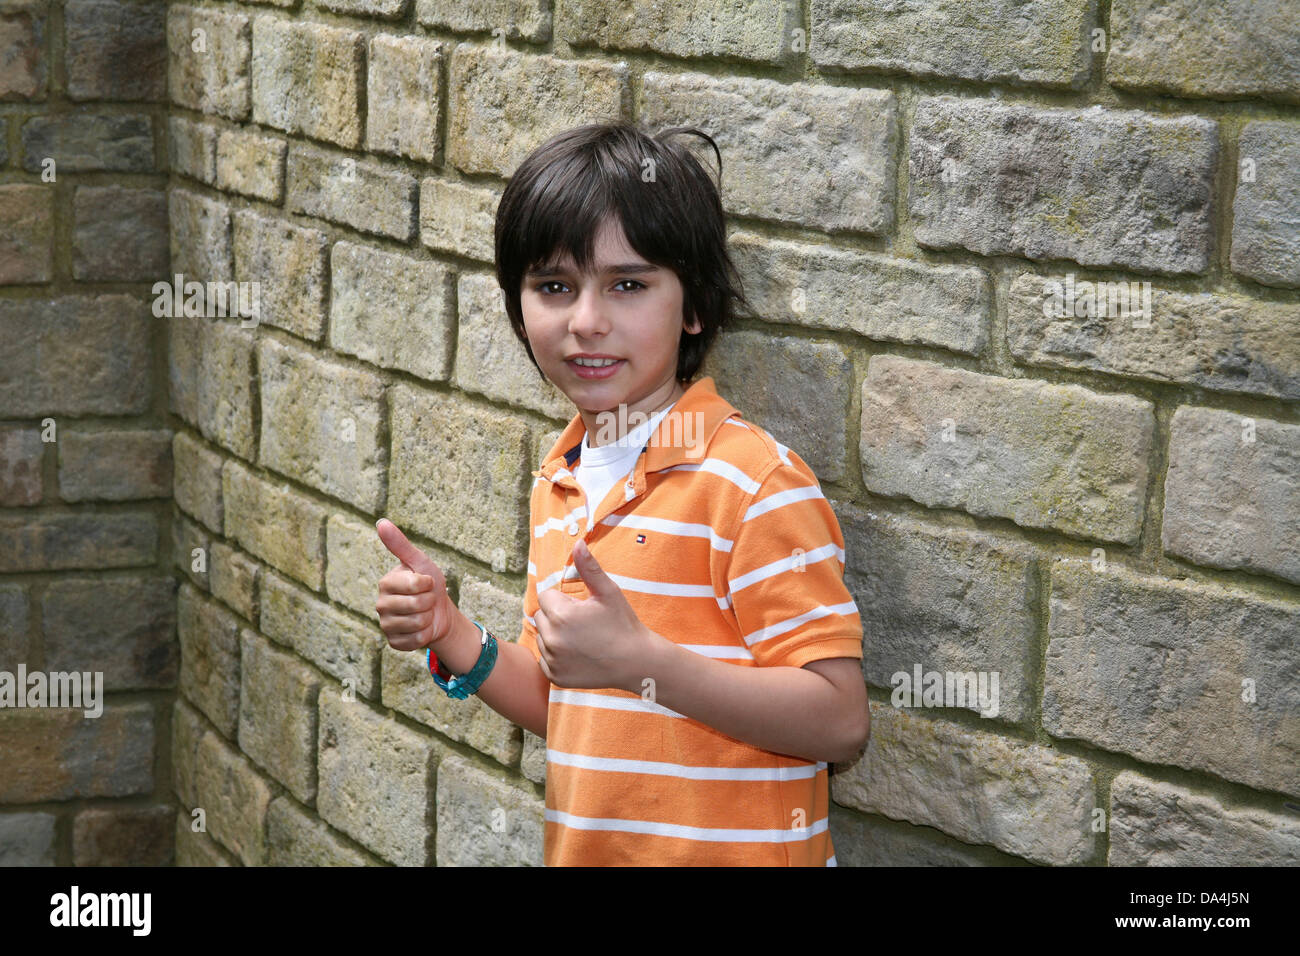 Portrait of confident brunette boy giving thumbs up against stone wall Stock Photo